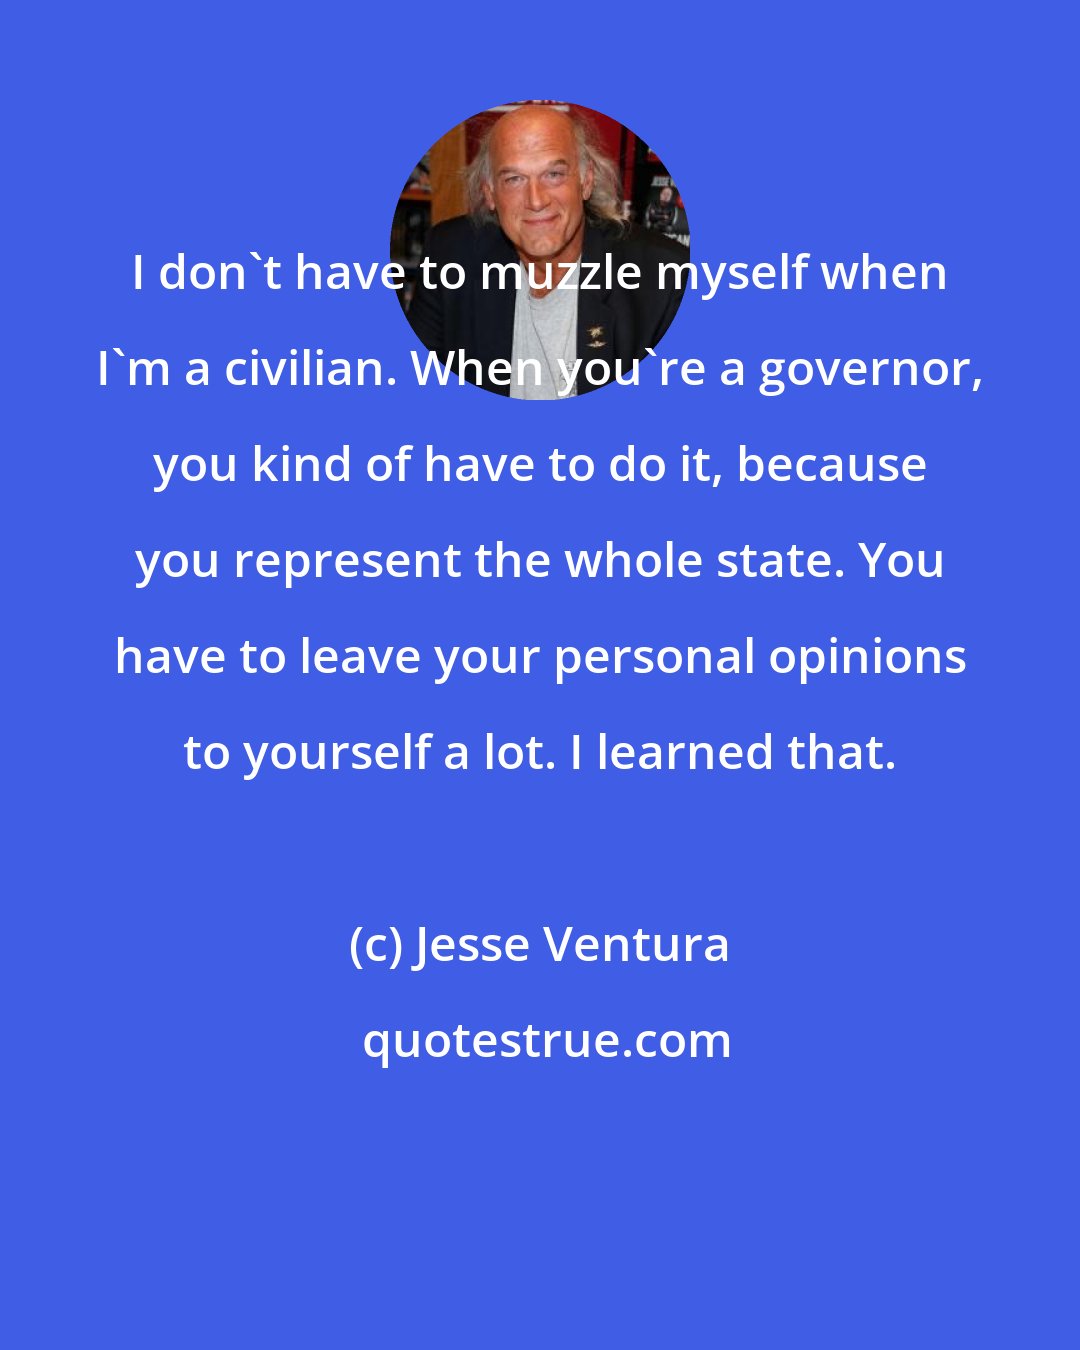 Jesse Ventura: I don't have to muzzle myself when I'm a civilian. When you're a governor, you kind of have to do it, because you represent the whole state. You have to leave your personal opinions to yourself a lot. I learned that.